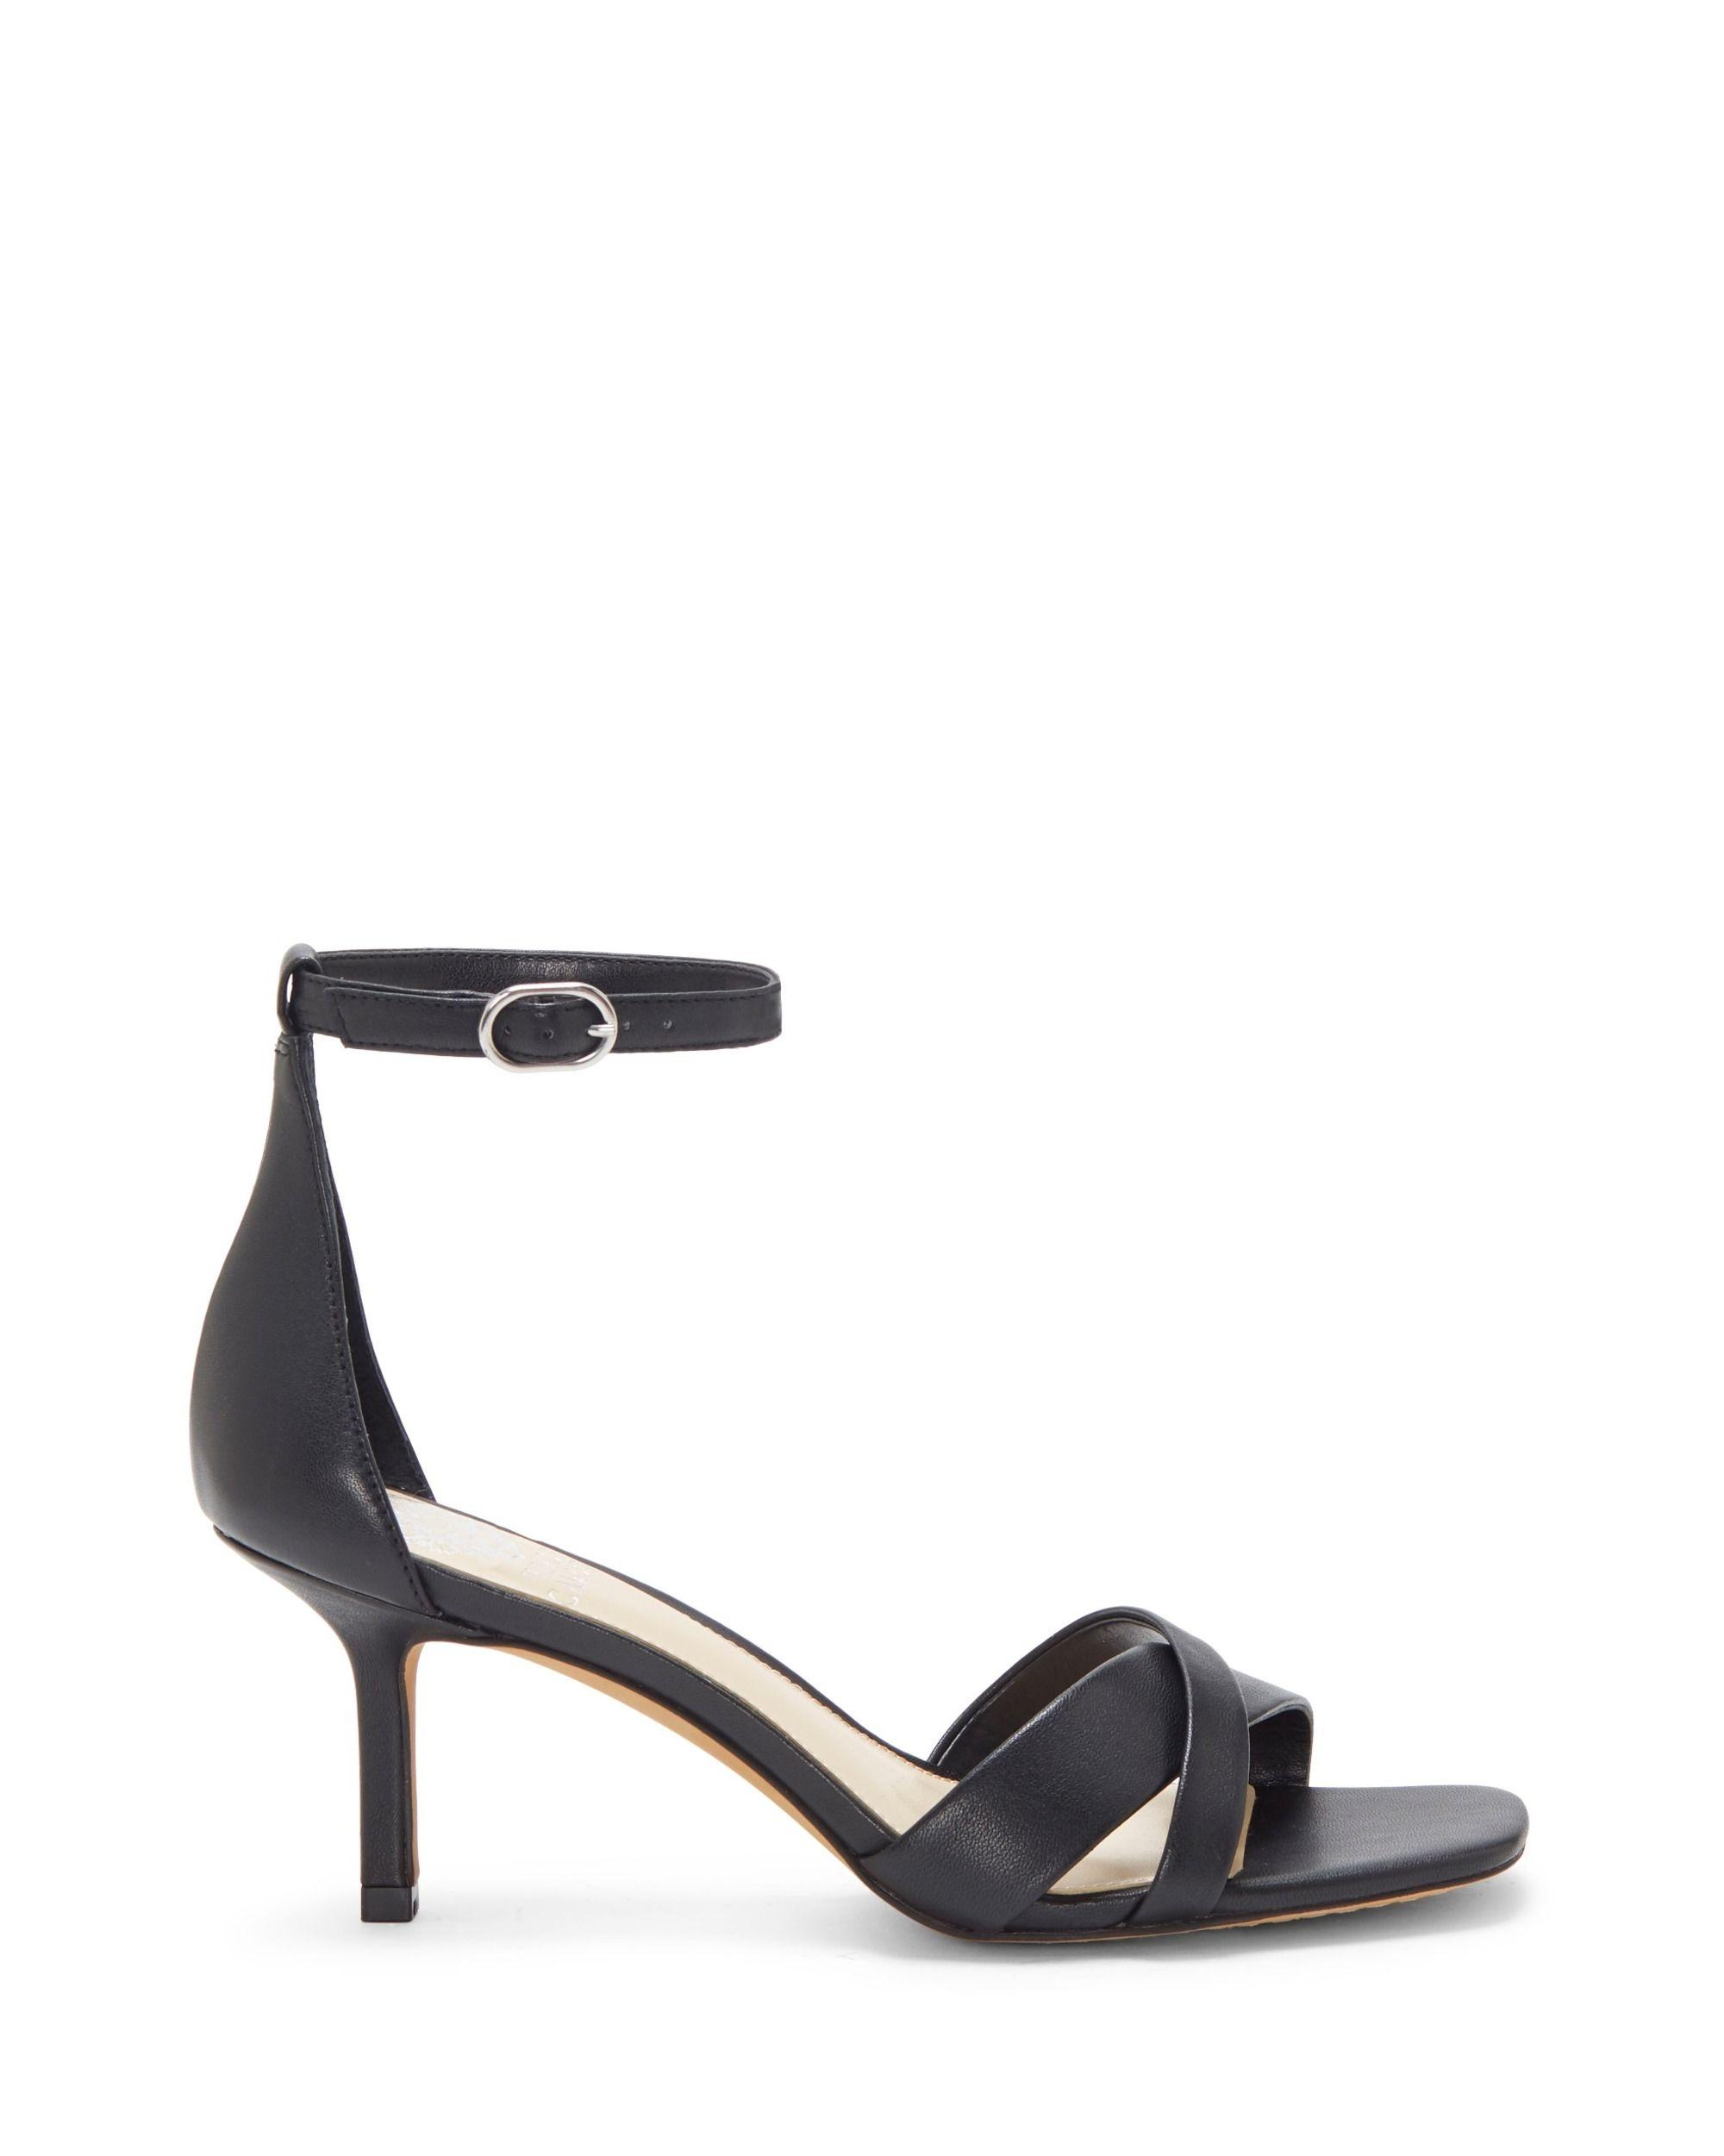 Vince Camuto Leather Sarriss Kitten-heel Sandal in Black - Lyst